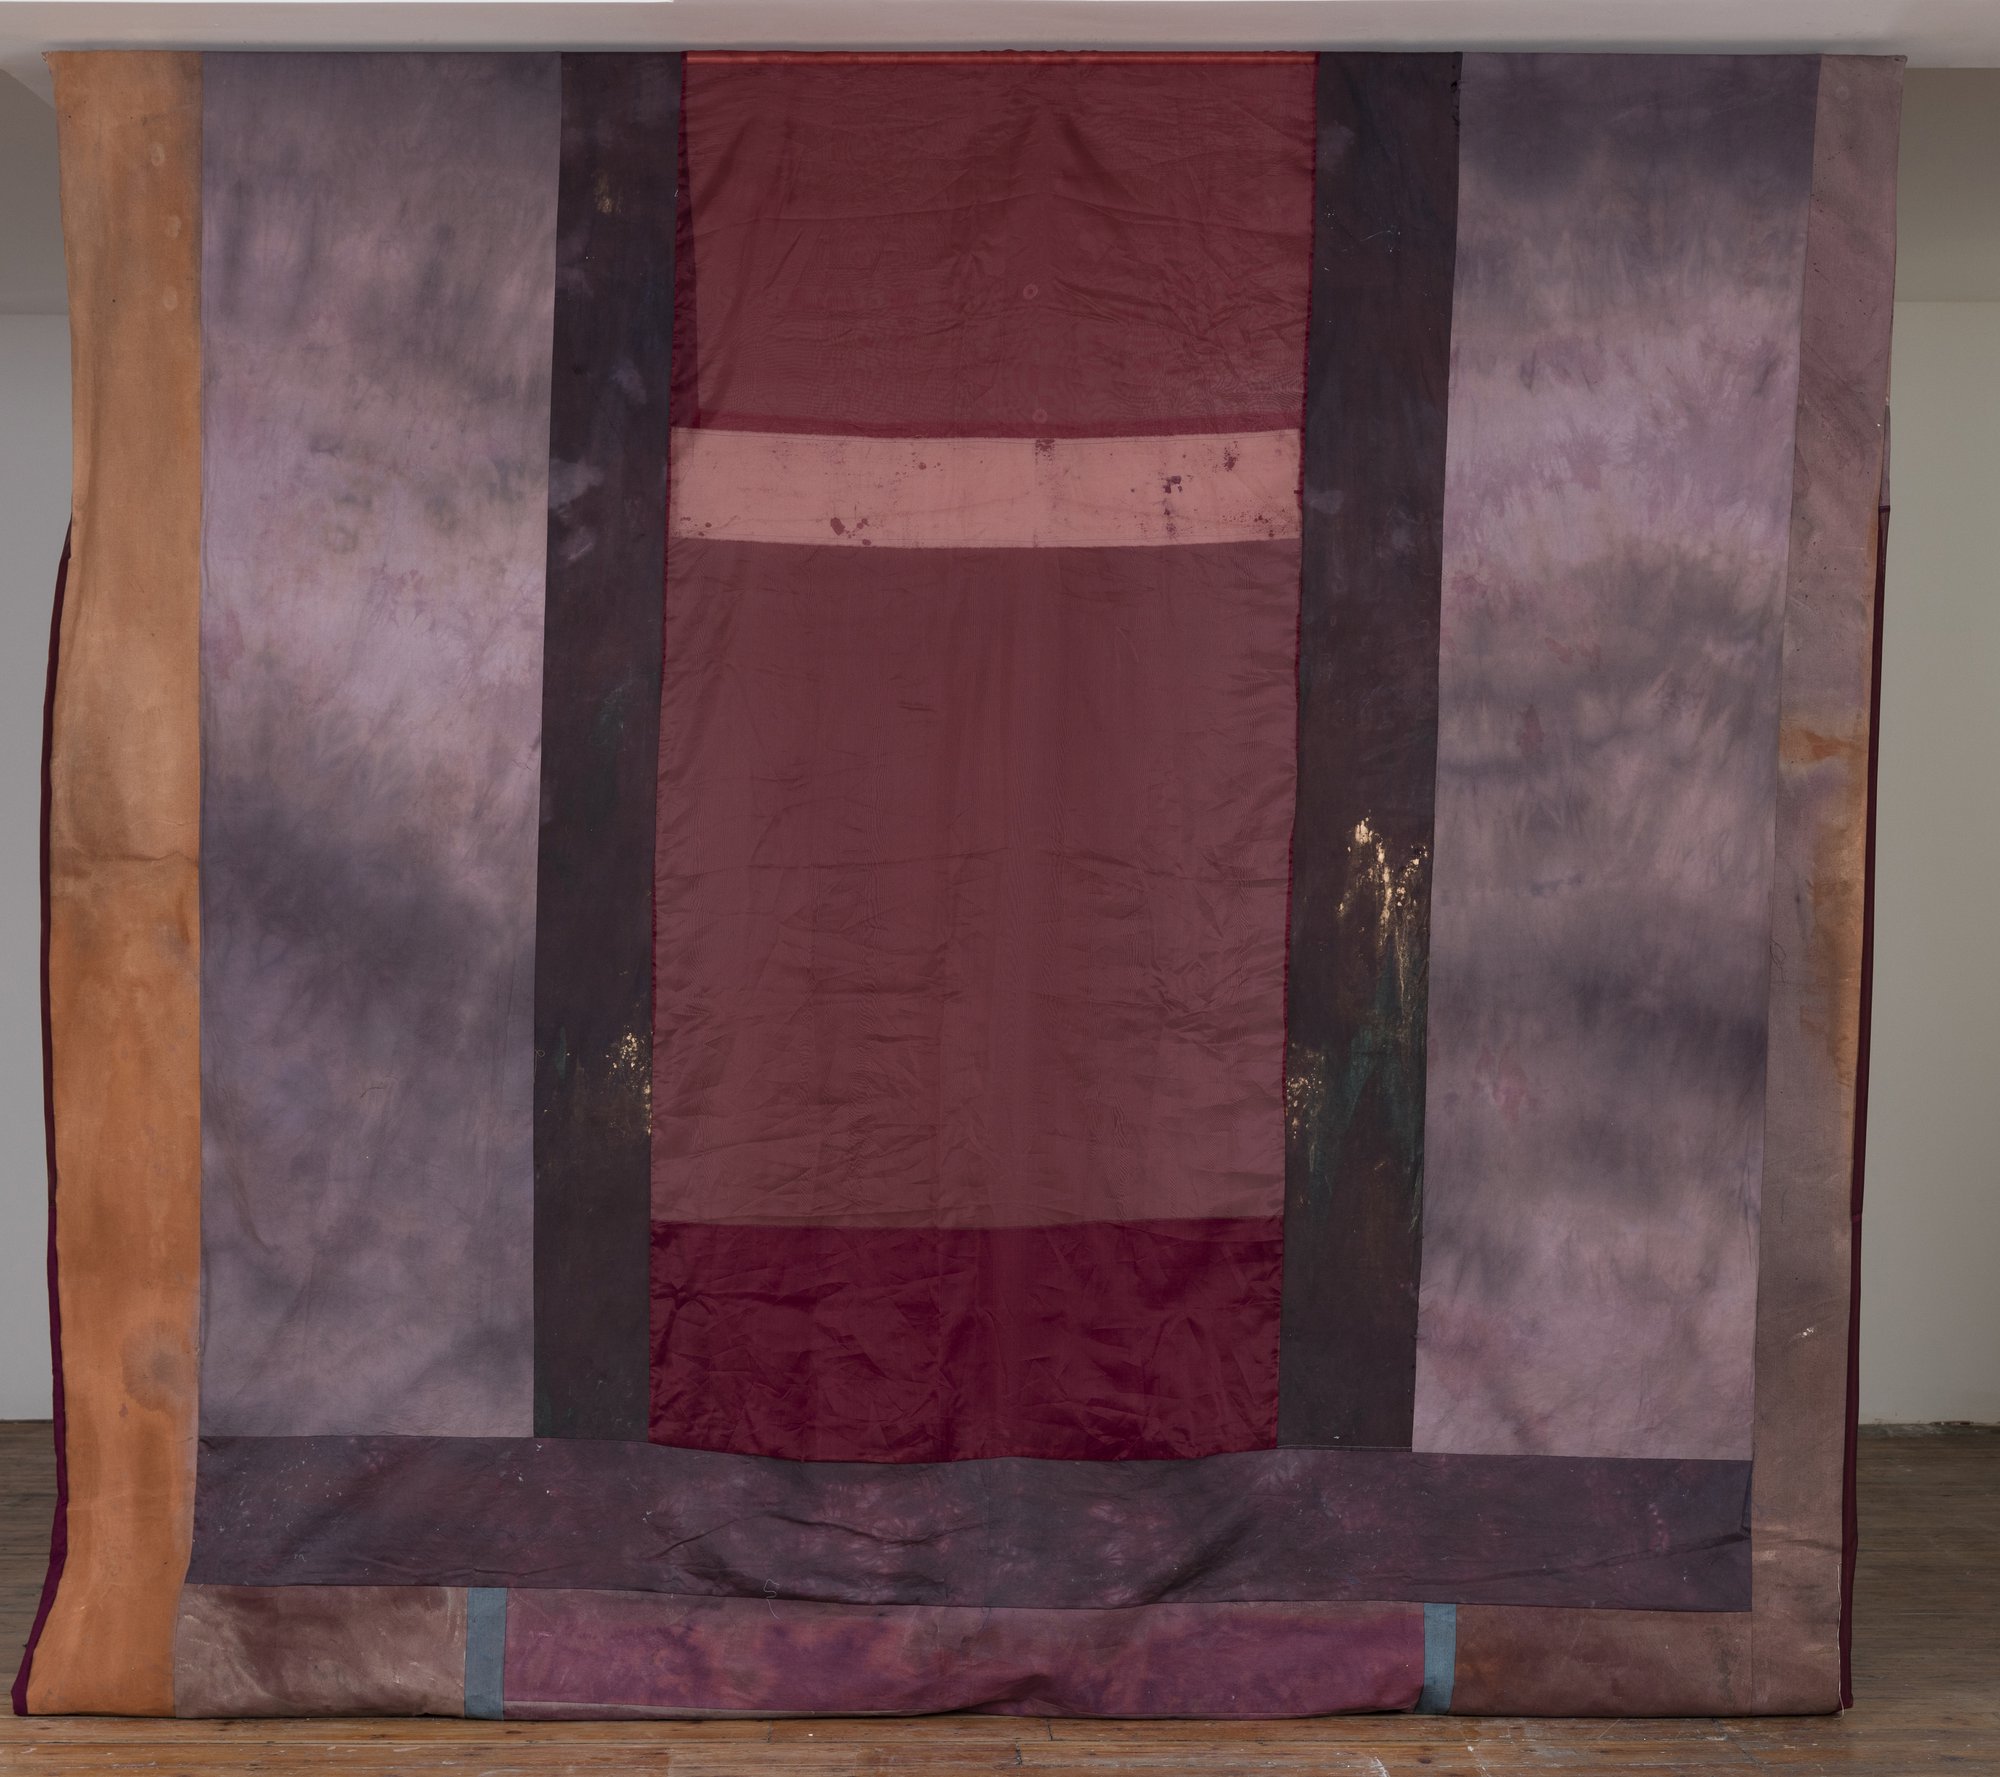 Tamara Henderson, Capers Weep For the Wine hued Burgundy, Curtain, mixed textiles, 340 x 290 cm (133 7/8 x 114 1/8 in), 2016